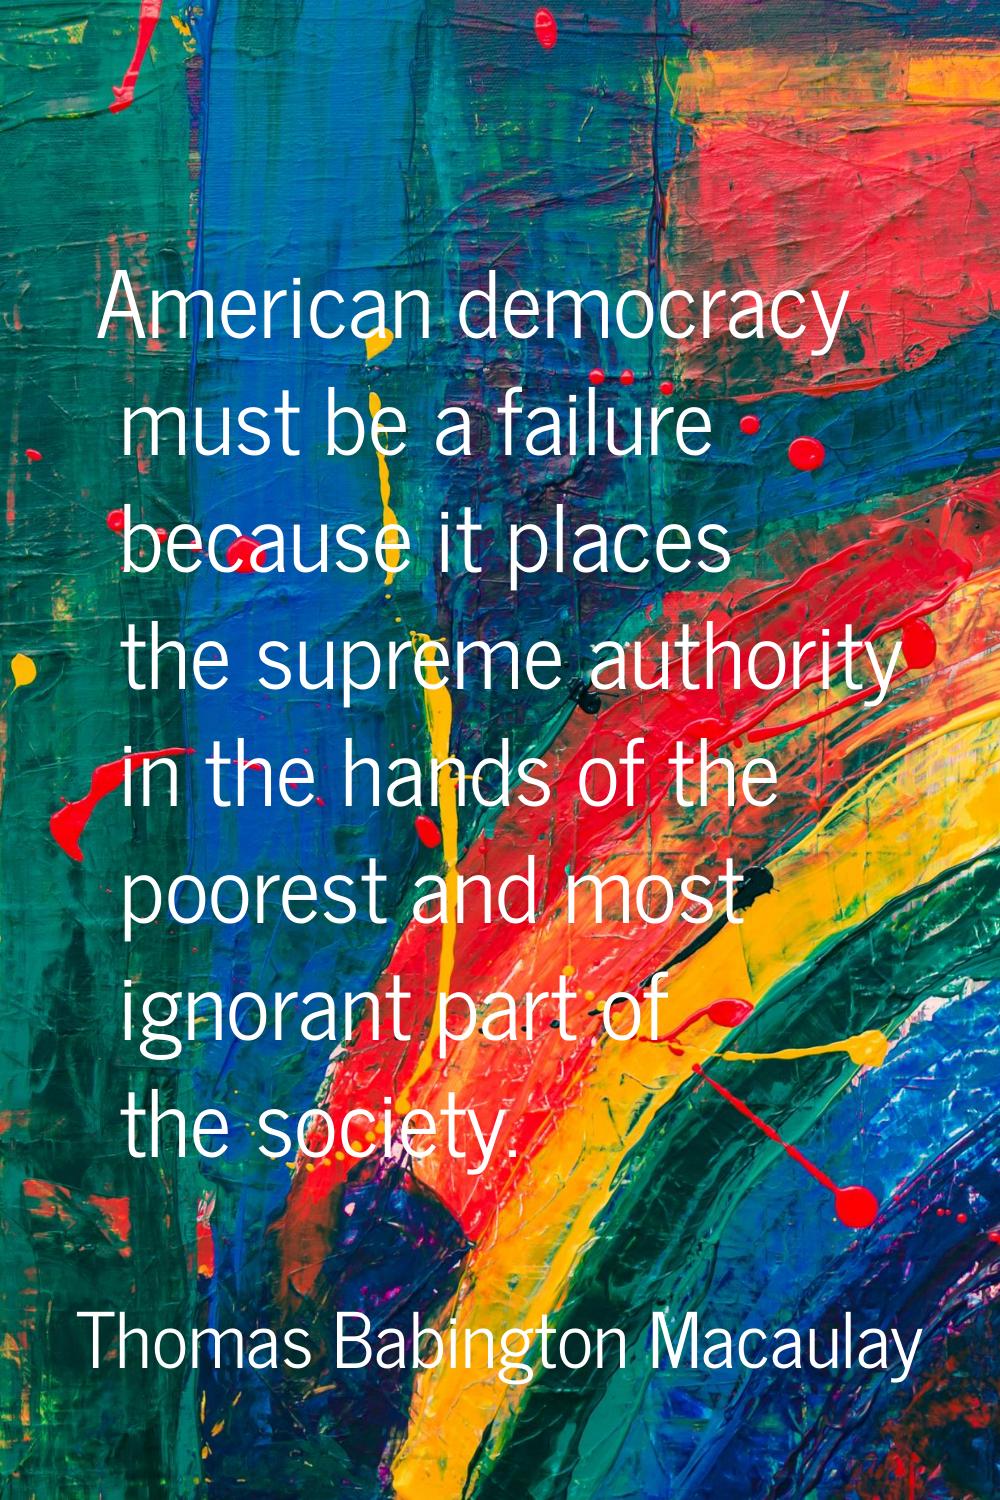 American democracy must be a failure because it places the supreme authority in the hands of the po